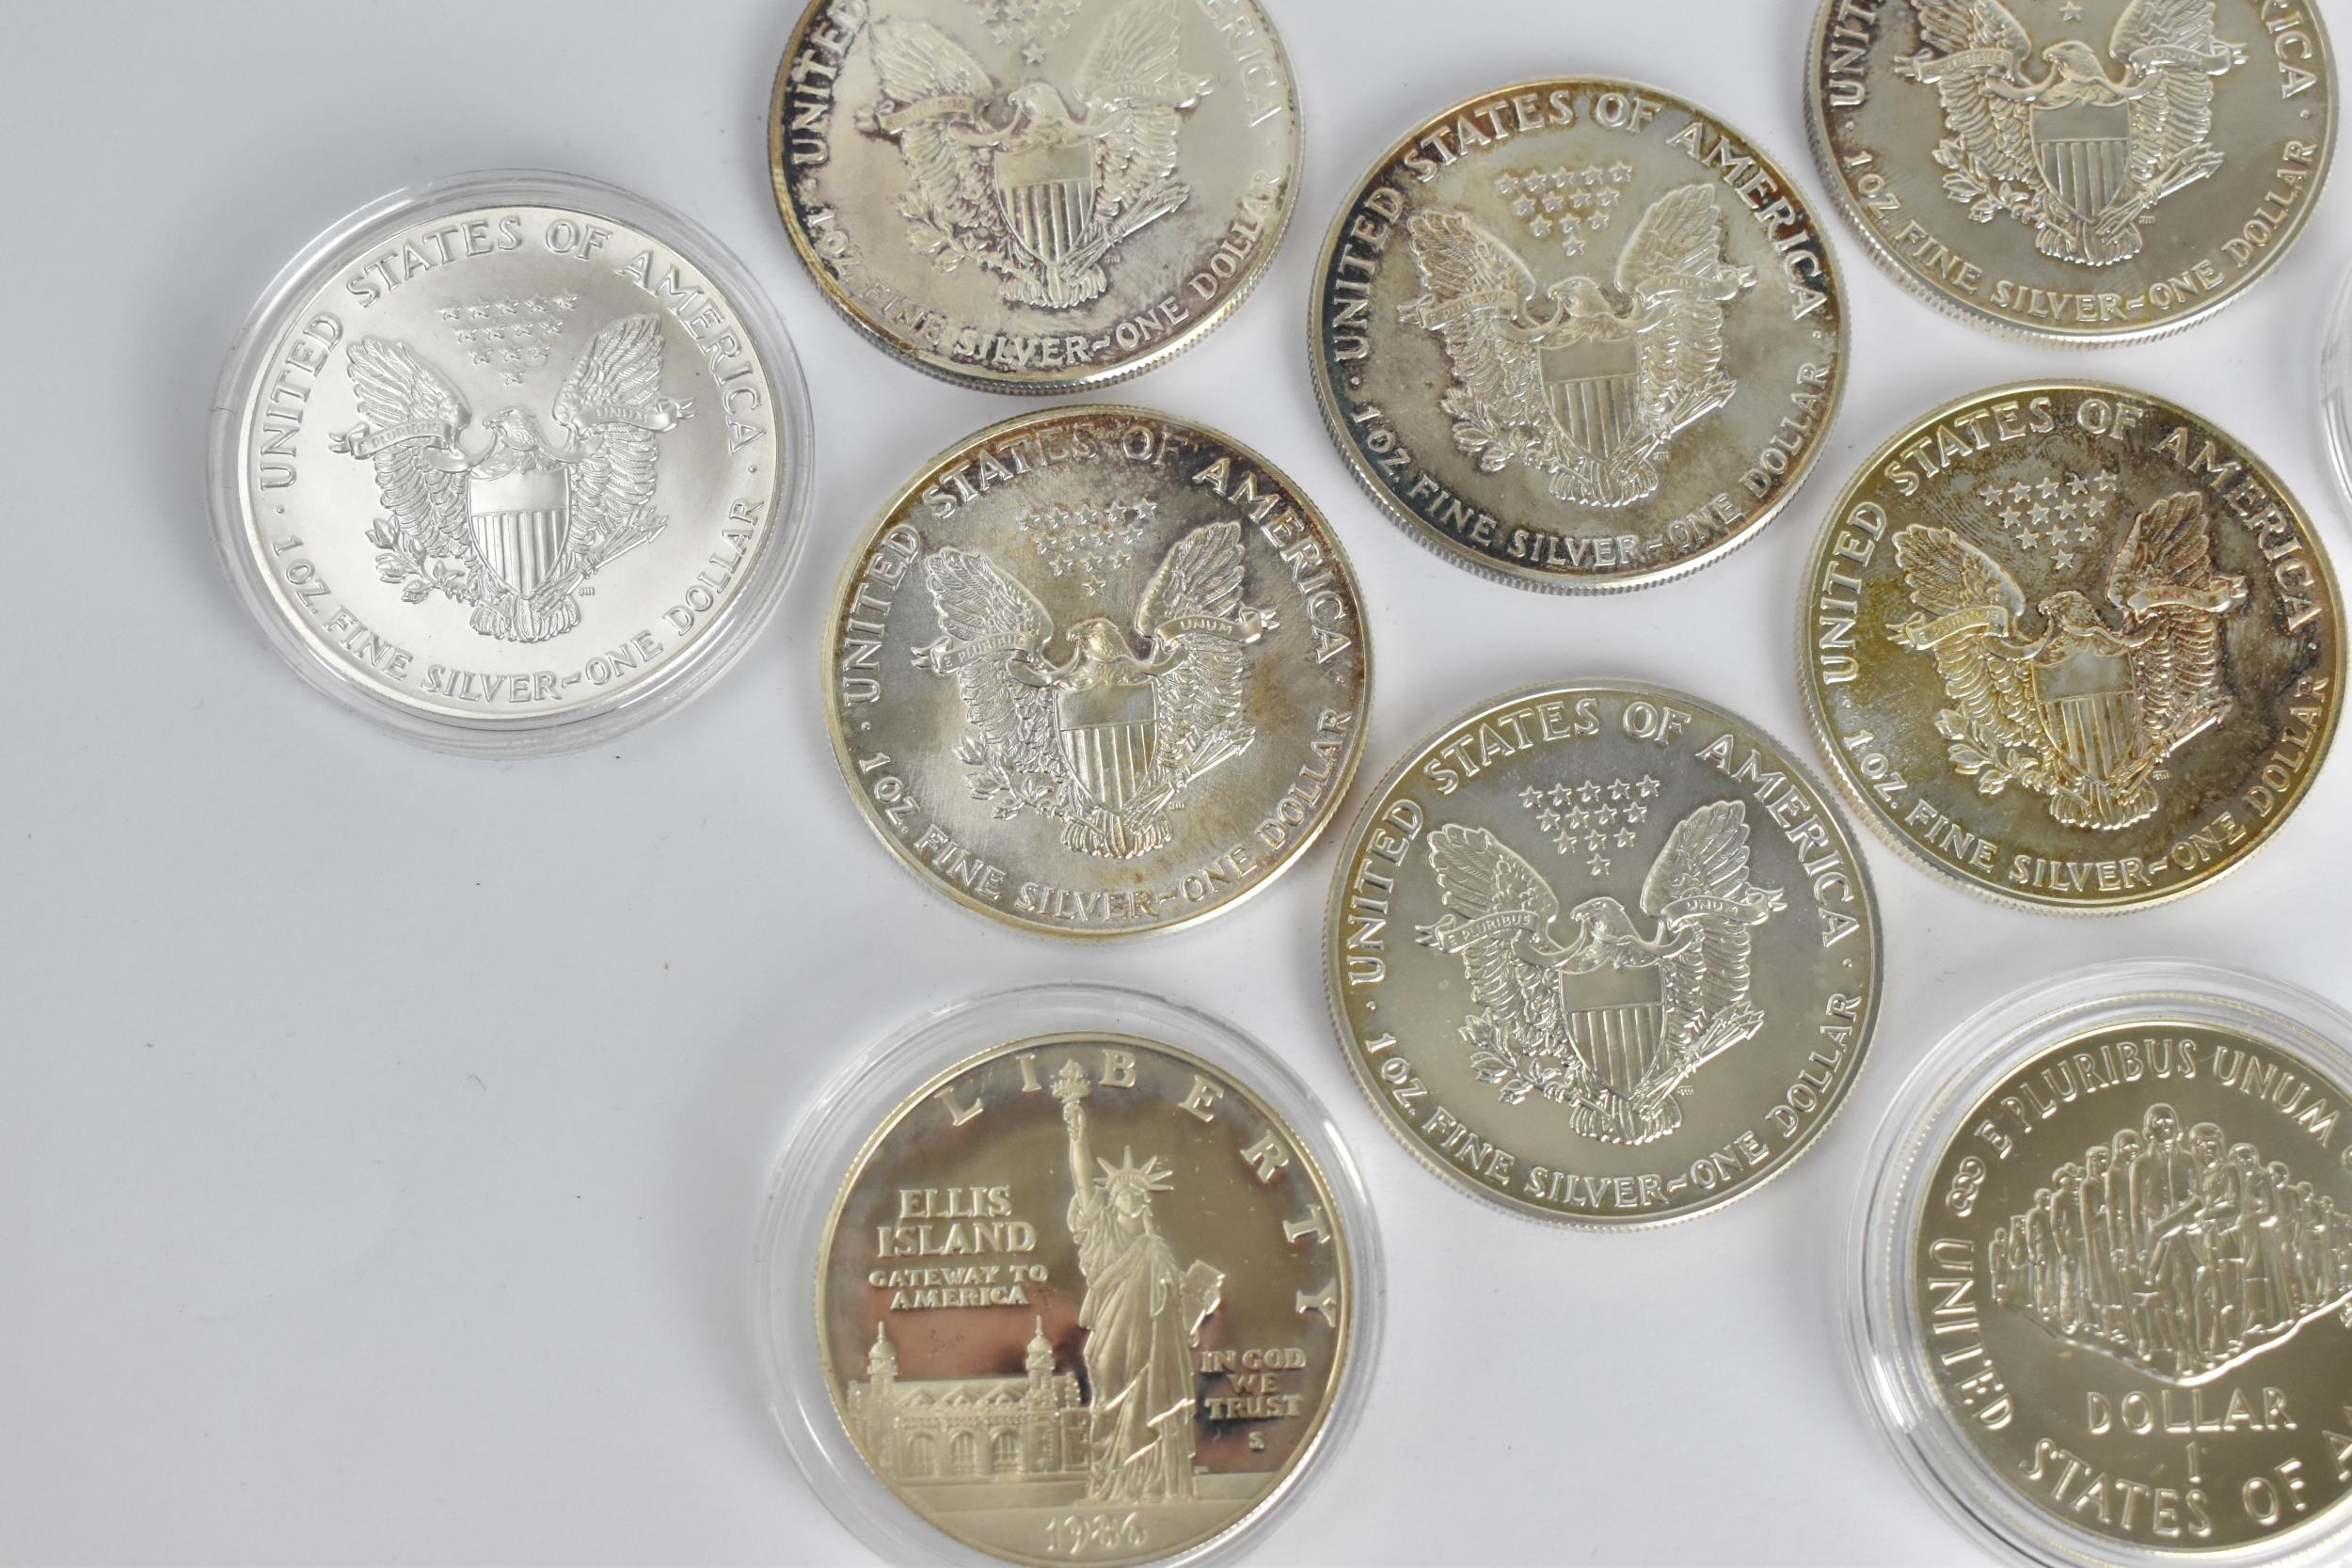 Official Silver Coins of The United States of America' part of the Royal Mint collection, eight ' - Image 3 of 10